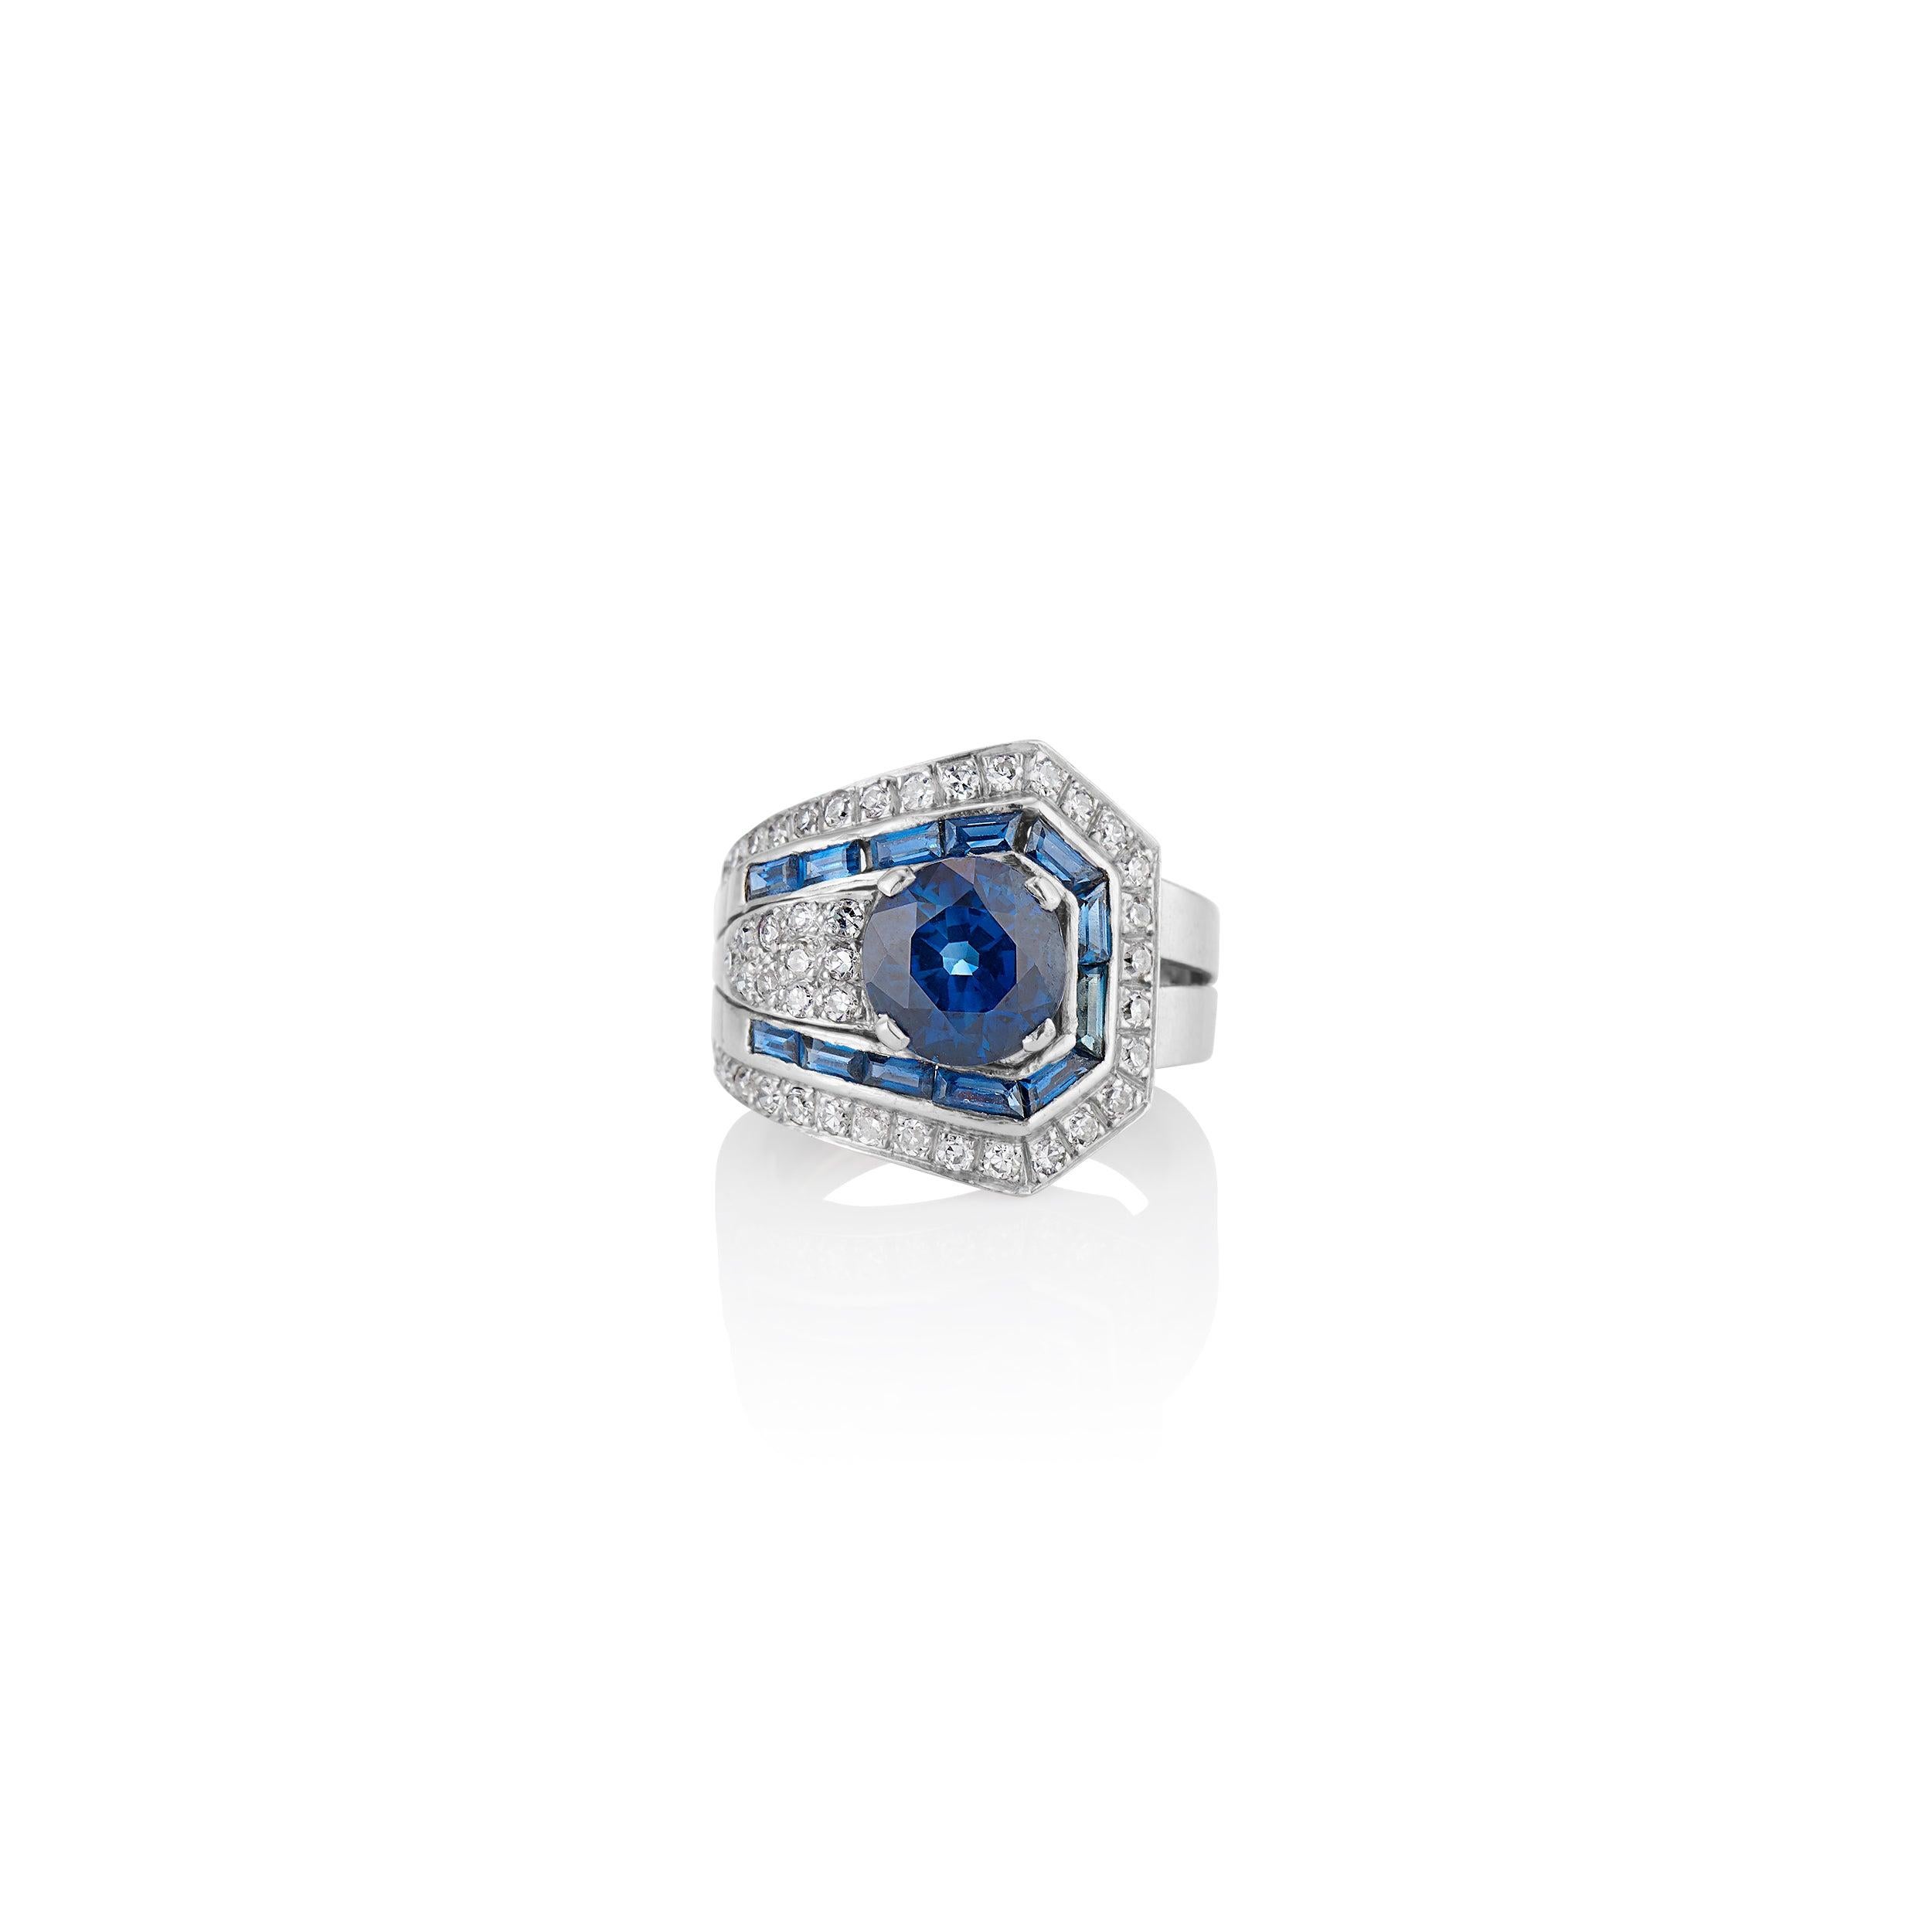 Masterfully hand crafted in platinum, this stylized buckle ring boasts a 3.82 carat royal blue sapphire embraced by a triangular section of pave-set diamonds, bordered by a single row of sleek calibre-cut sapphires and sparkling single-cut diamonds.